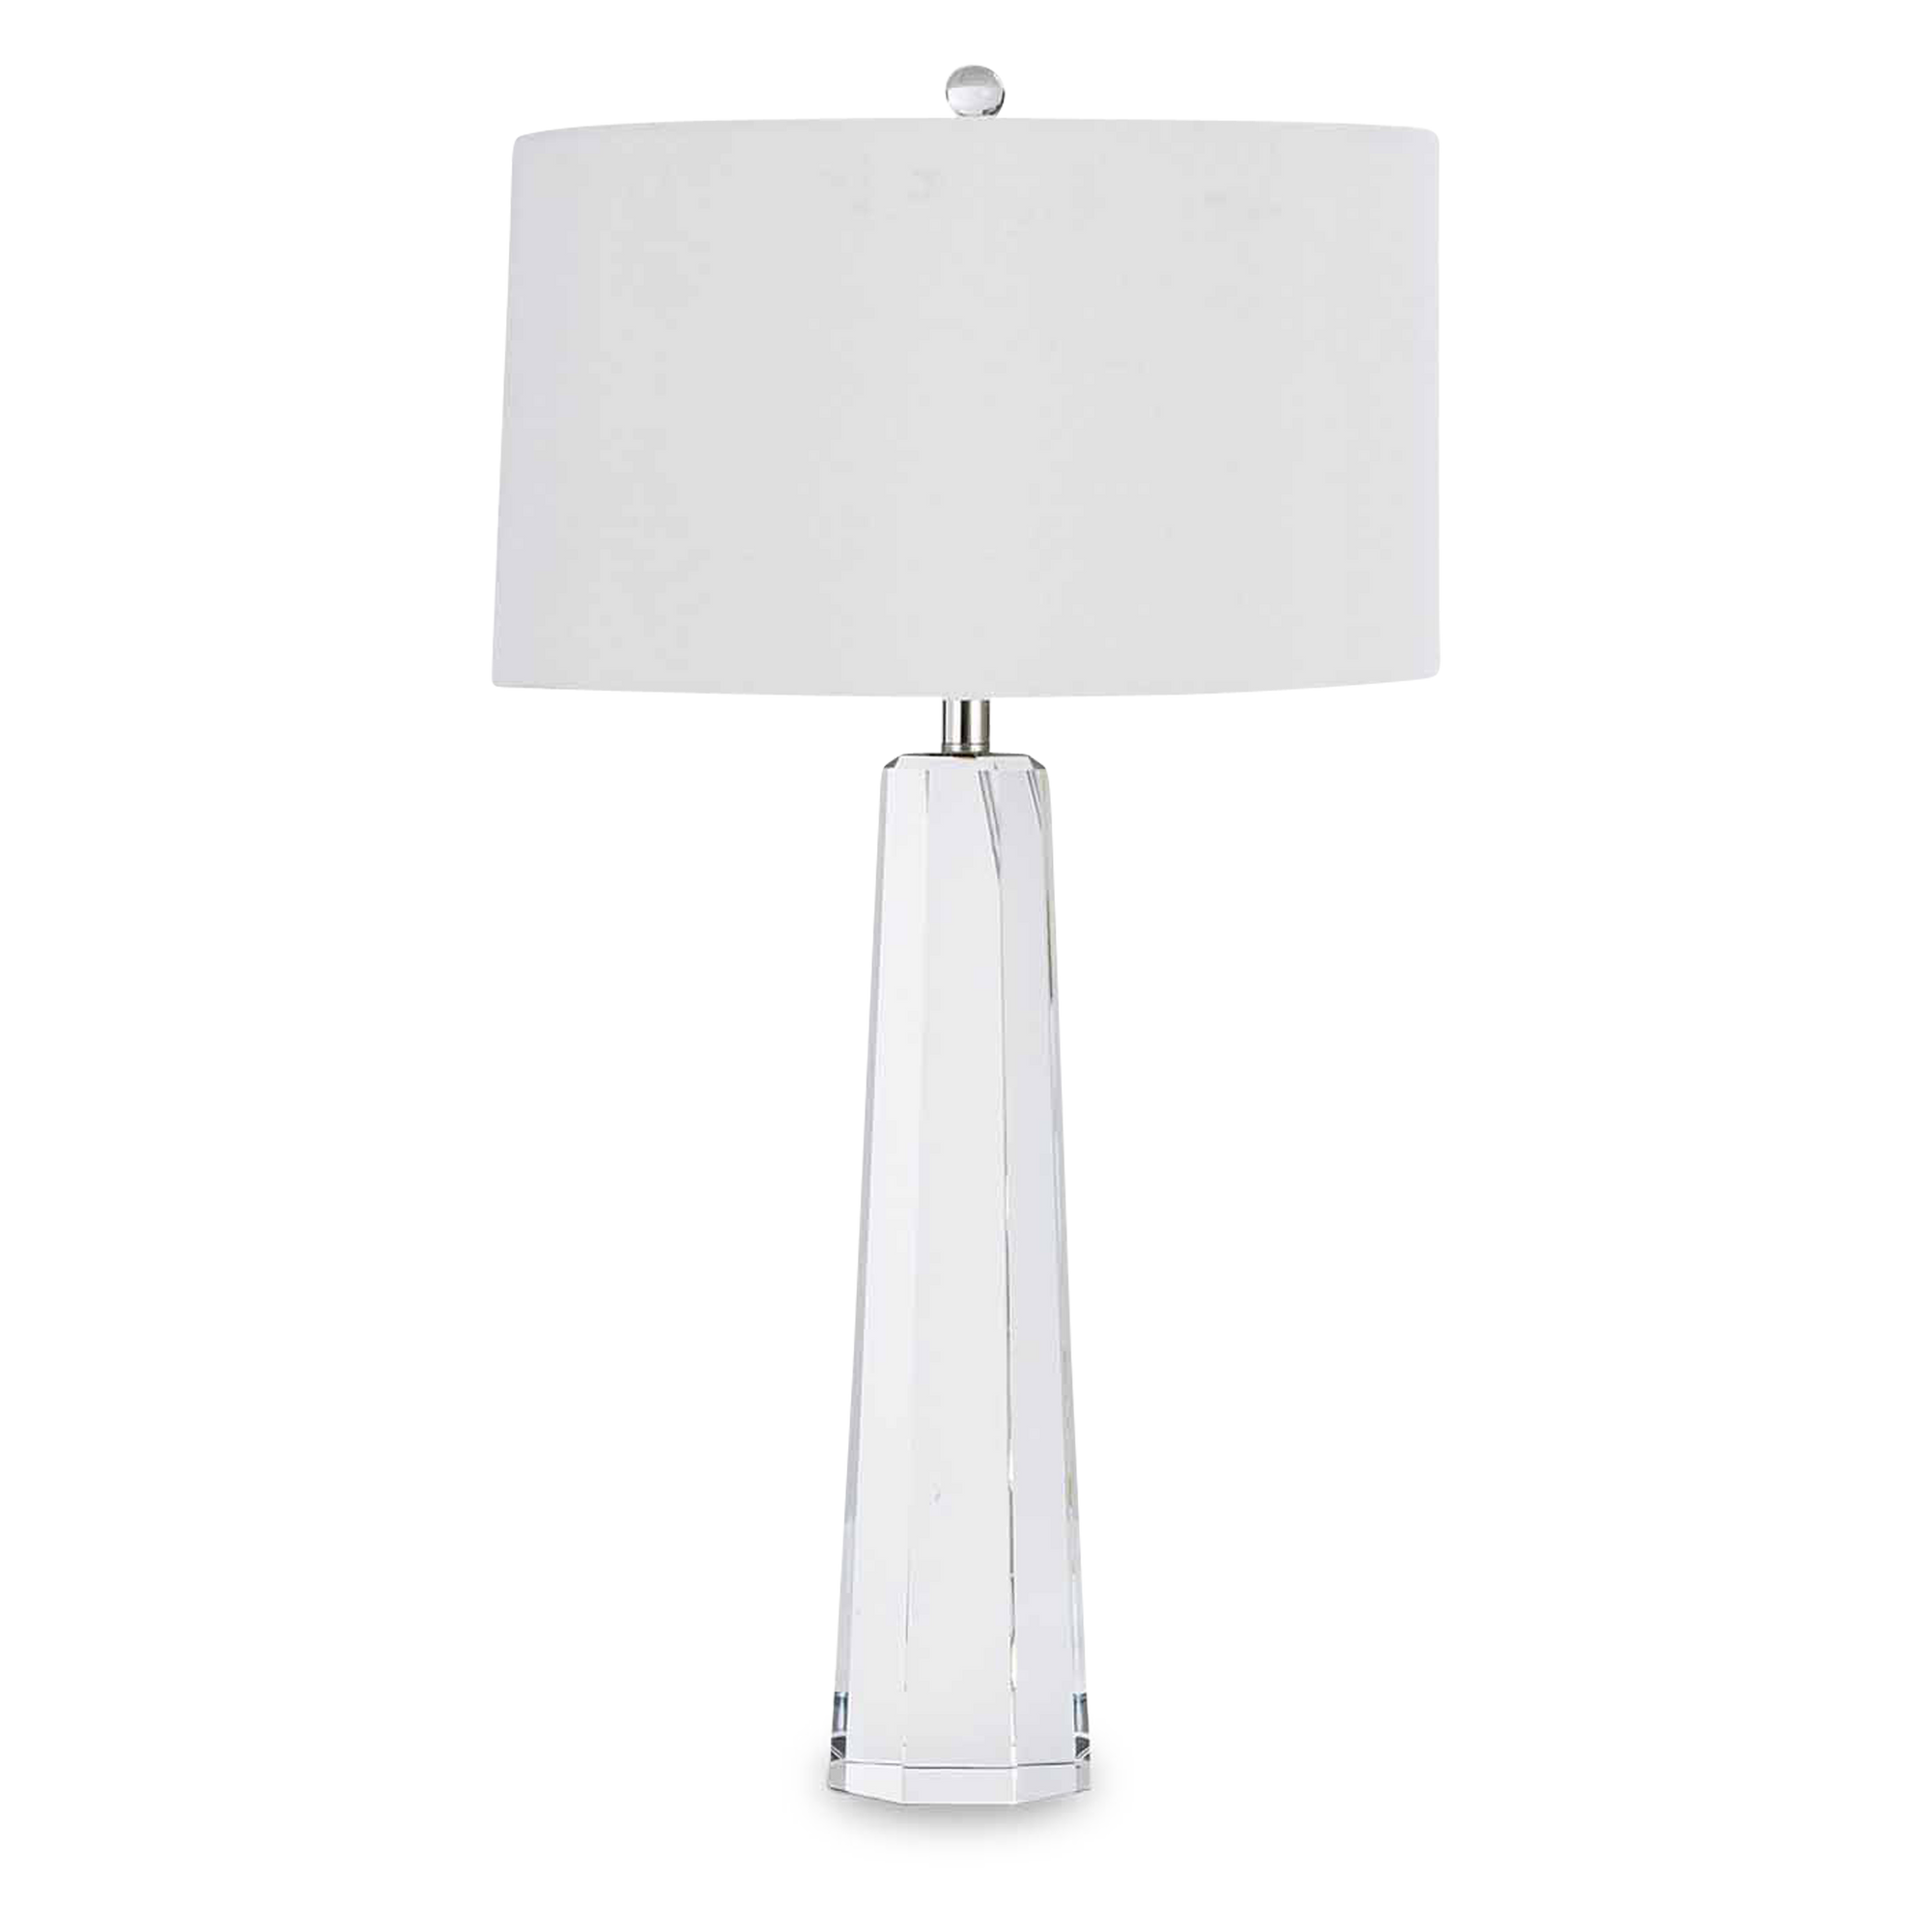 Contemporary style is redefined in this minimalist table lamp with a slim and tapered crystal base.